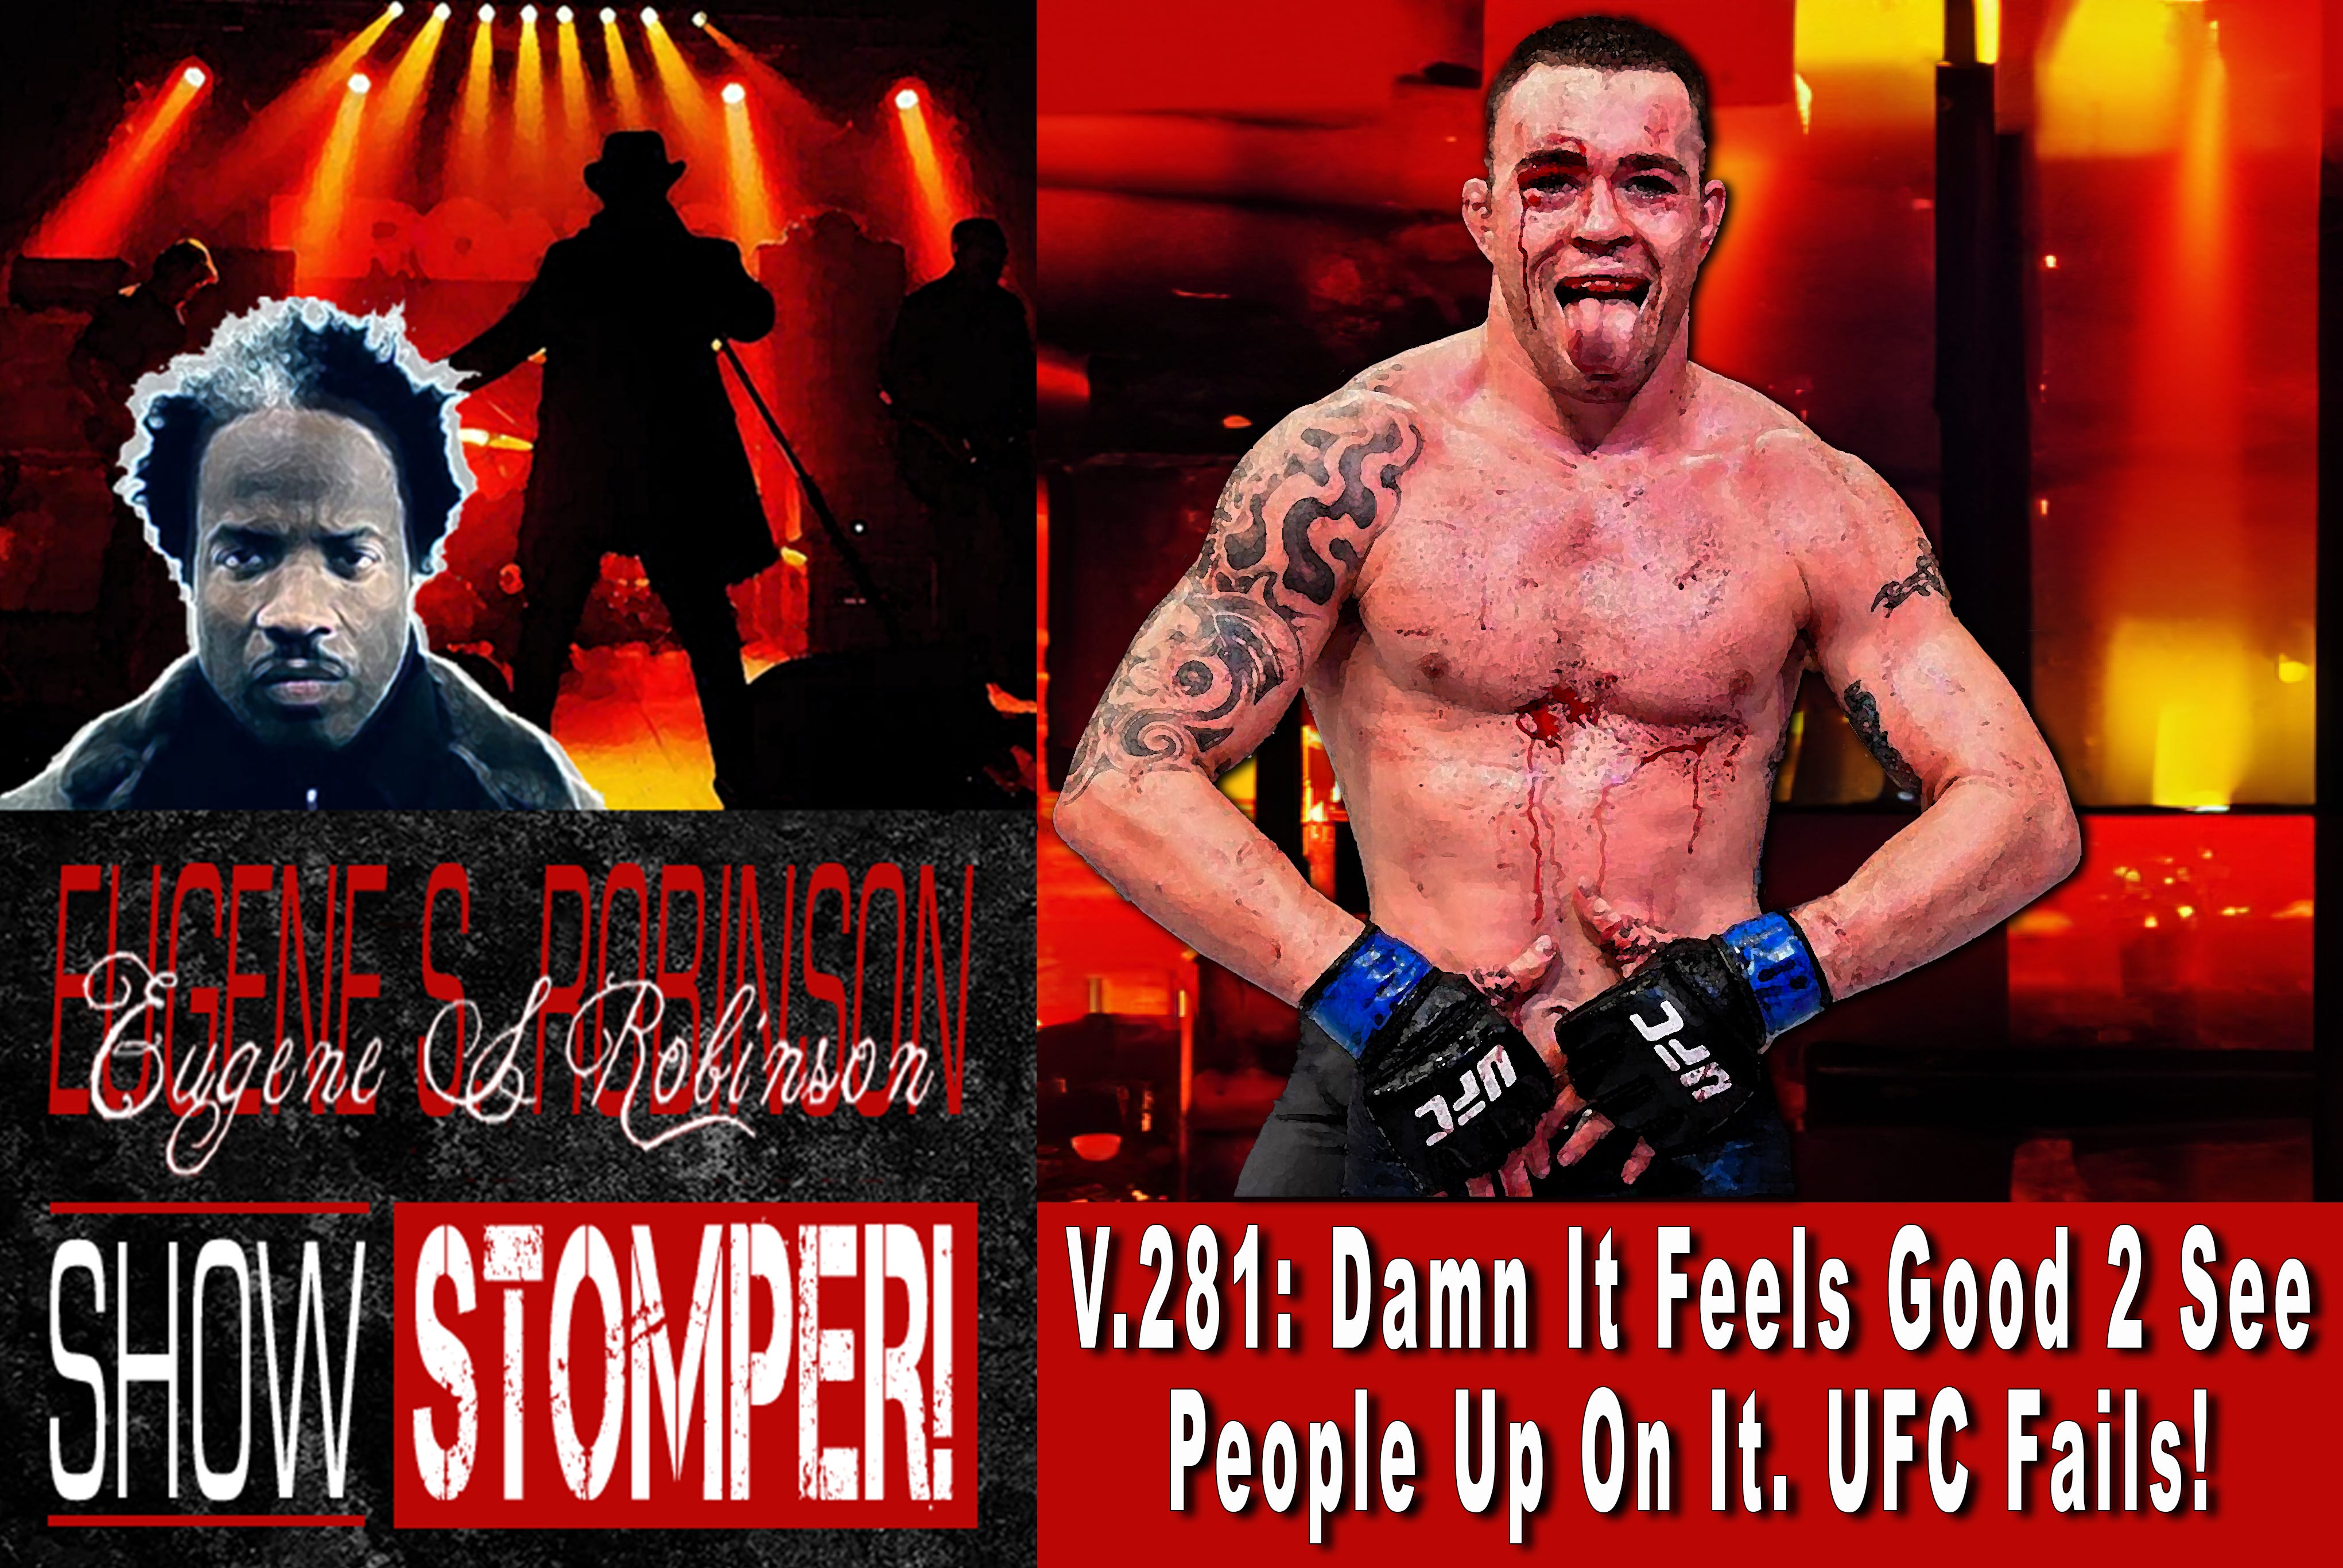 V.281: Damn It Feels Good 2 See People Up On It. UFC Fails! On The Eugene S. Robinson Show Stomper!